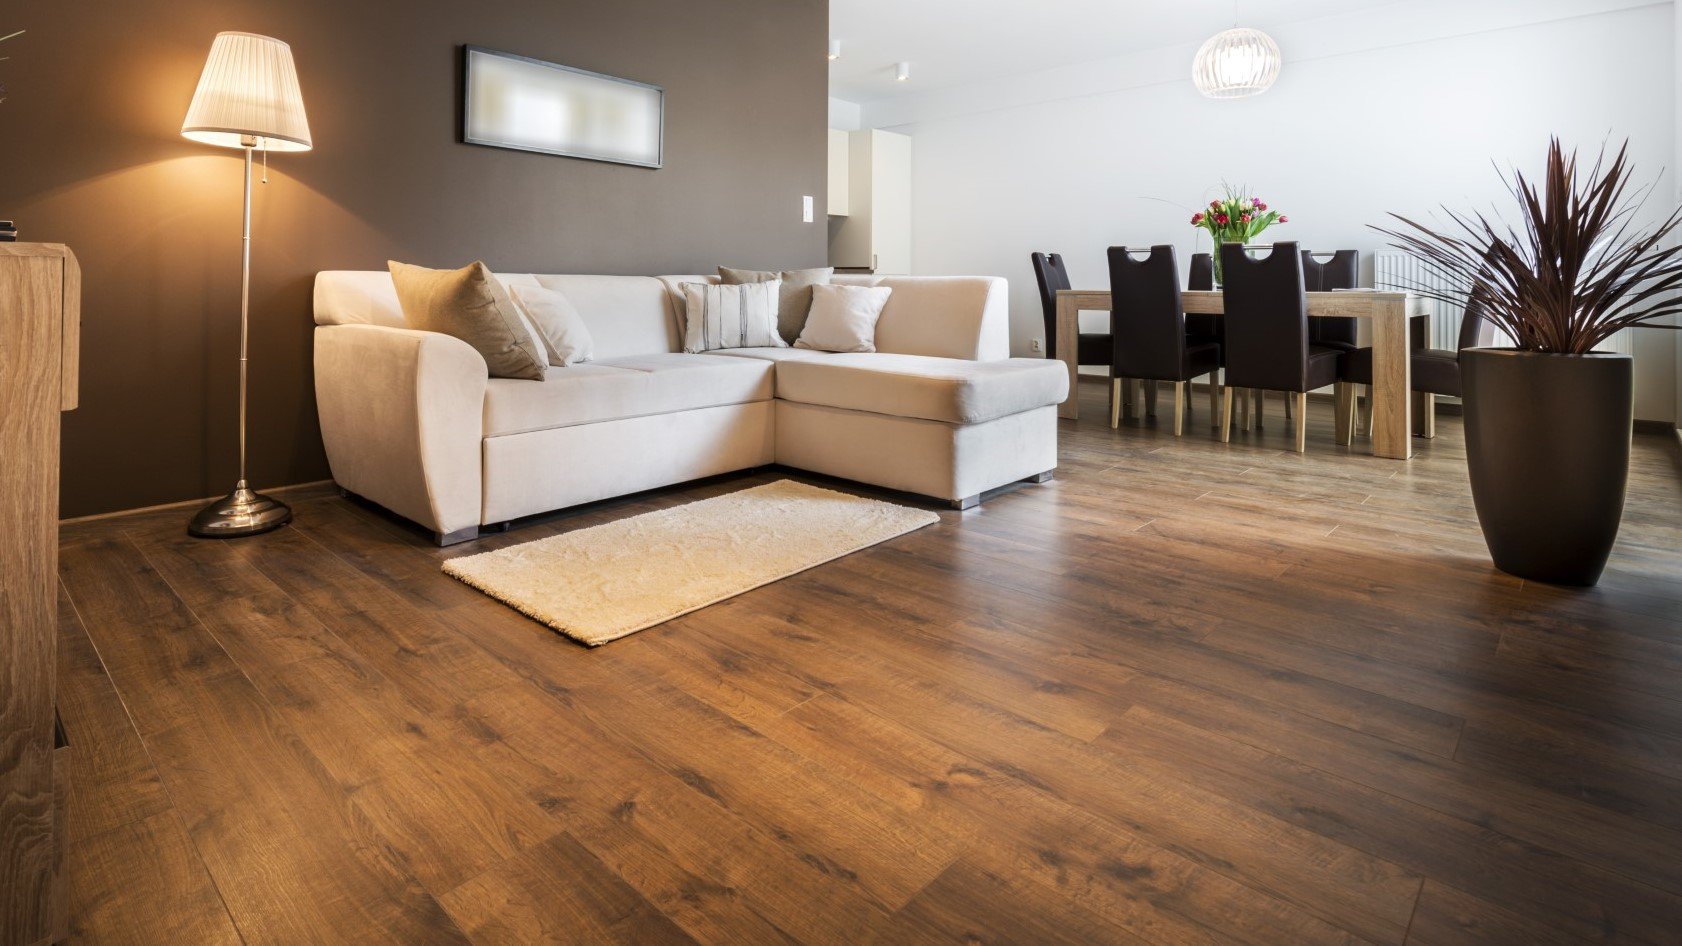 The 5 Best Flooring Options for Your Home